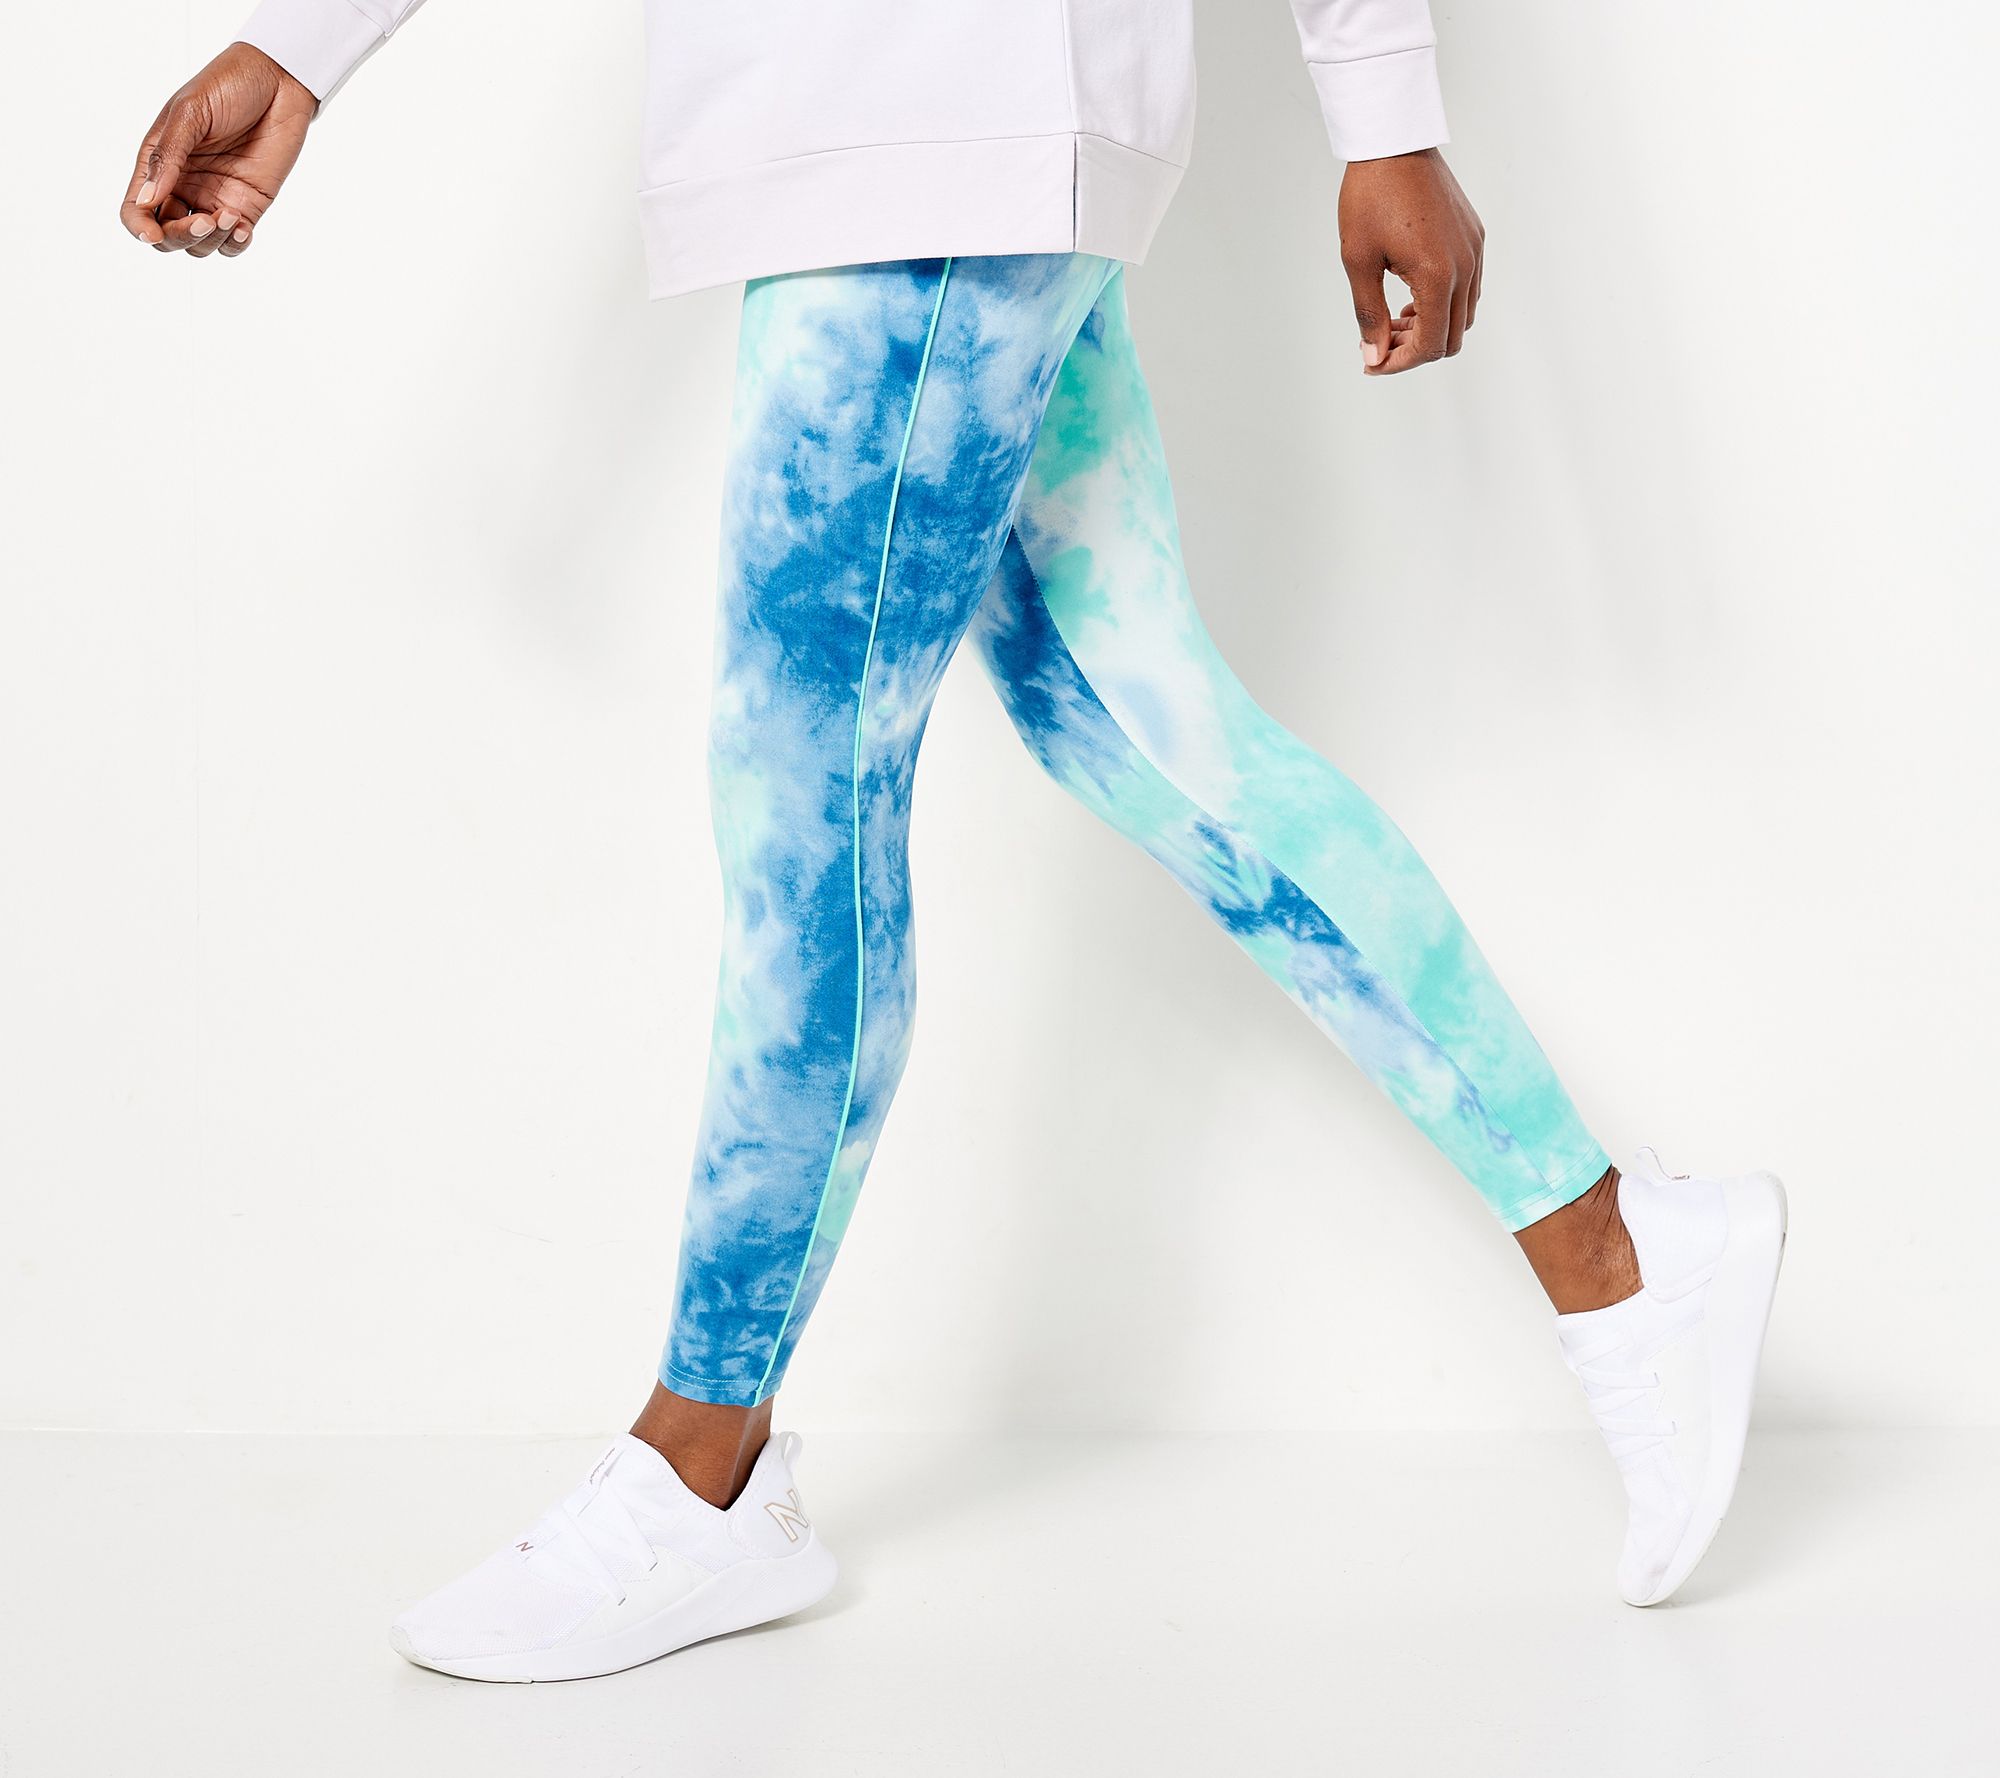 Fartey Capri Pants for Women Plus Size High Waisted Yoga Capris Casual Fashion Tie Dye Print 3/4 Pants Slim Fitted Elastic Waist Cropped Pants for